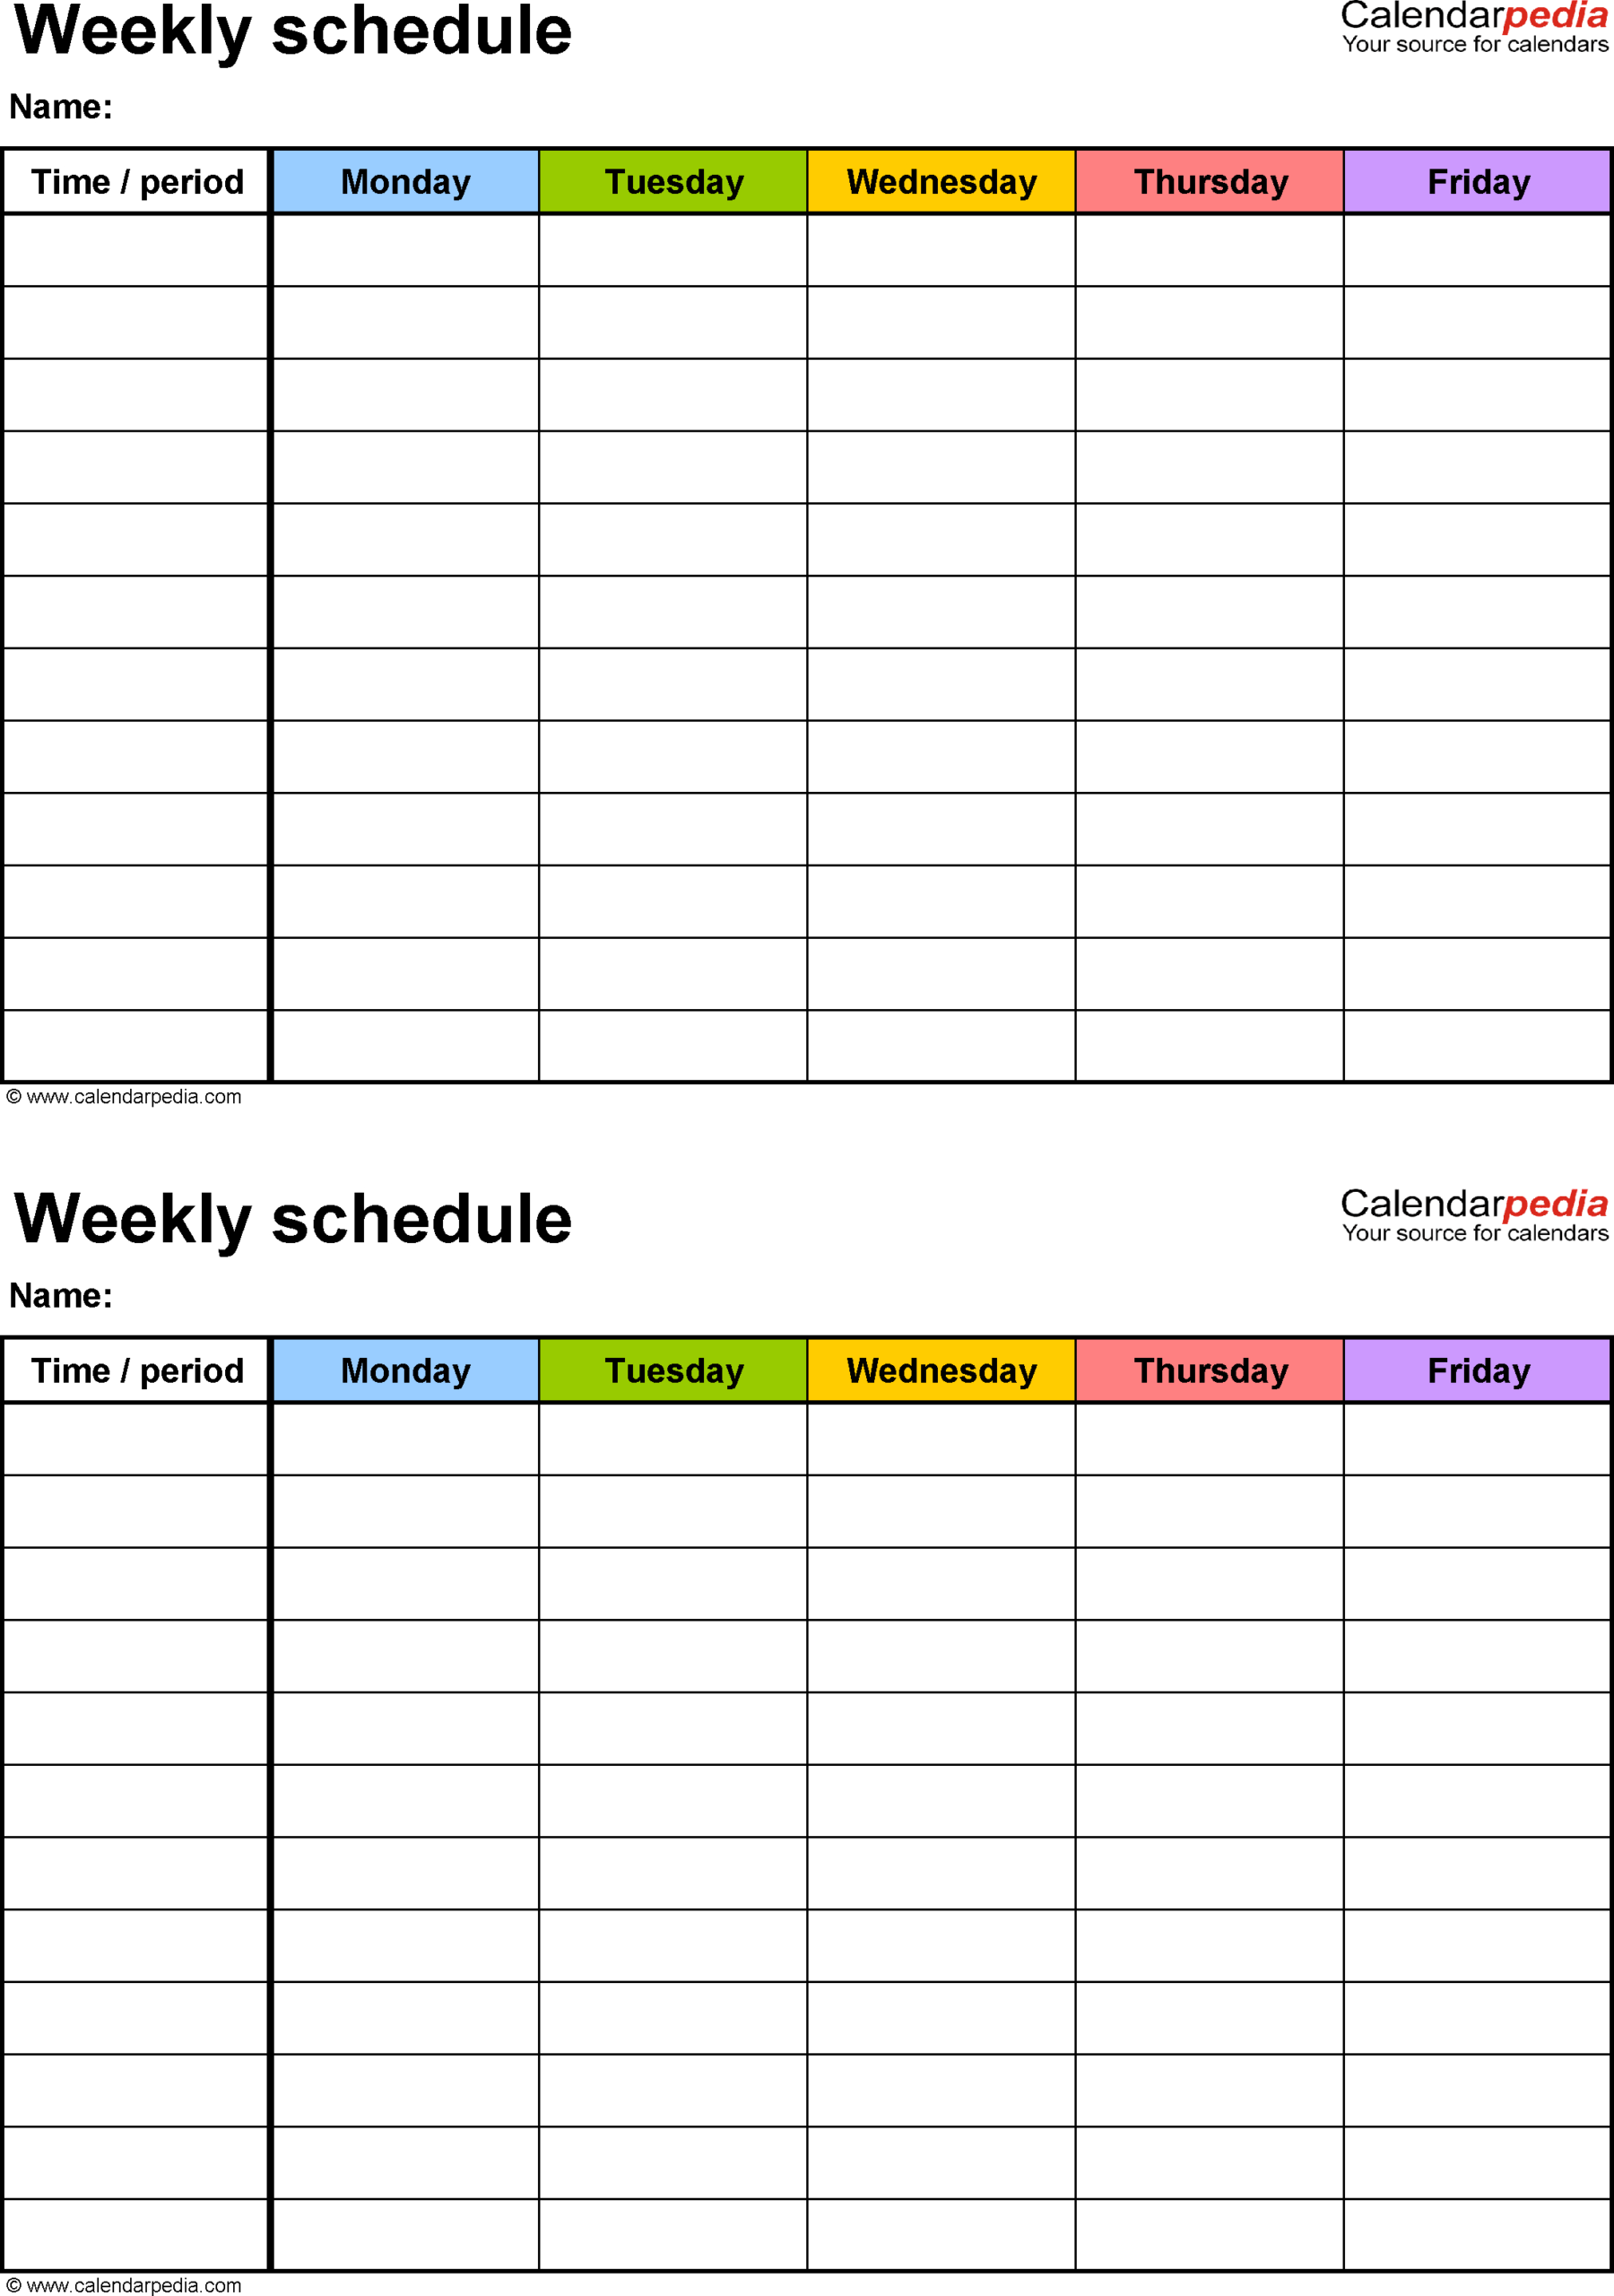 Free Weekly Schedule Templates For Excel – 18 Templates With Regard To Monthly Meeting Calendar Template